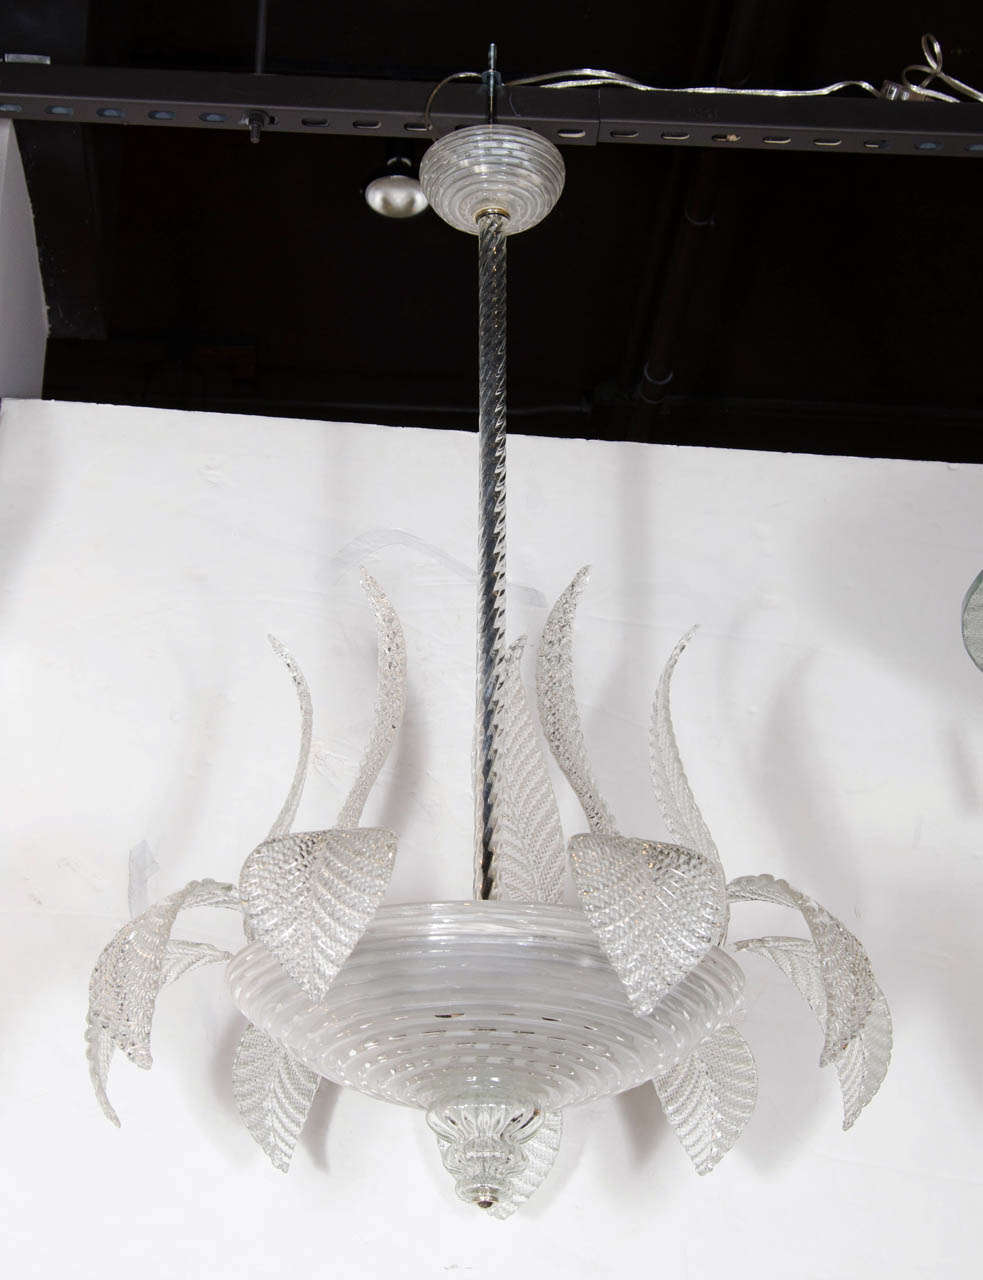 This exquisite chandelier is made of hand blown murano glass with 24k white gold inclusions.The central dome features a three tier blown glass finial detail with the foliate leaf plumes emanating  outwards. The central stem is twisted hand blown